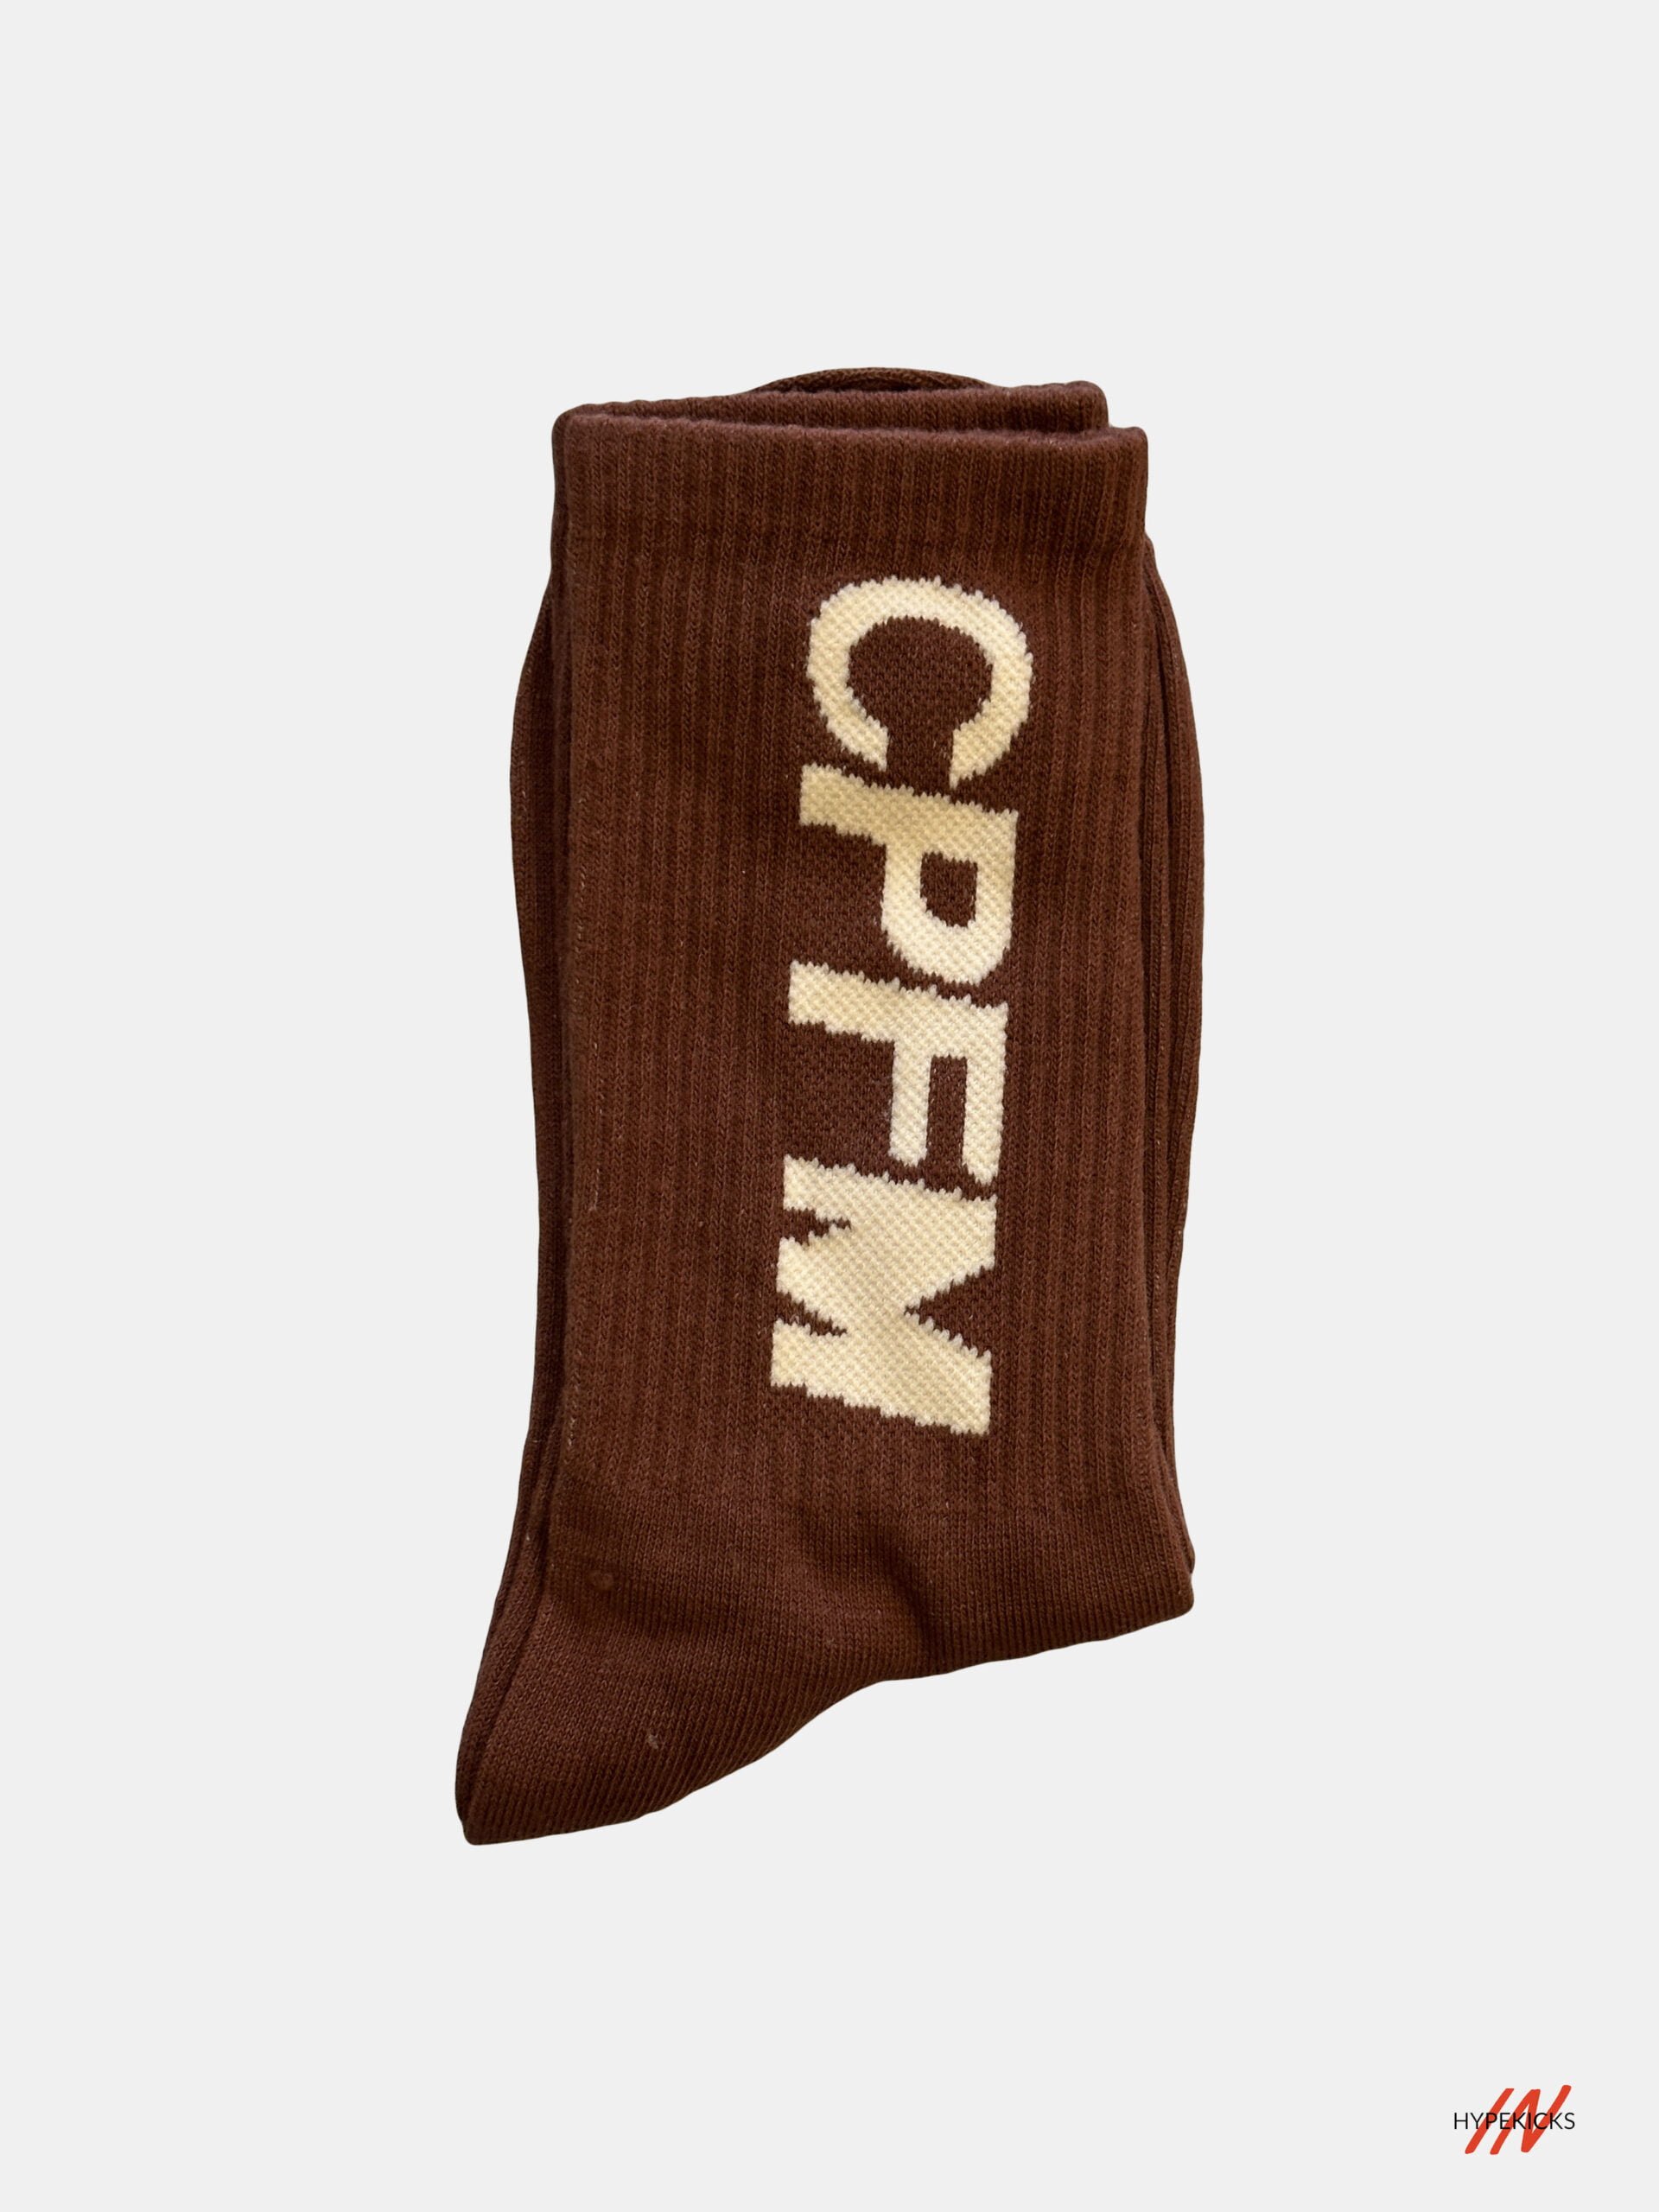 CPFM BROWN 2